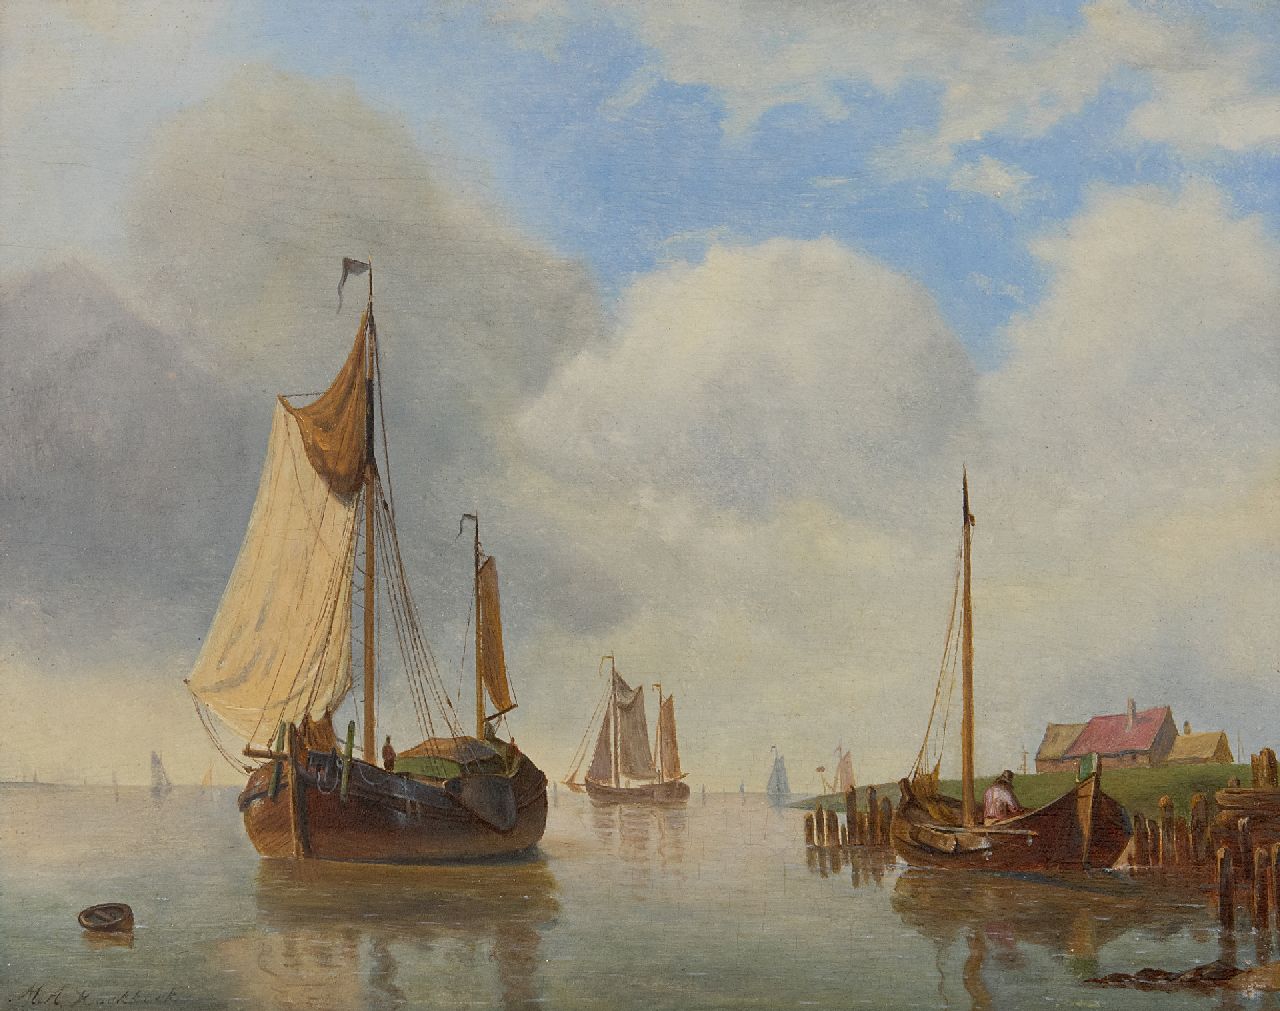 Koekkoek I M.A.  | Marinus Adrianus Koekkoek I | Paintings offered for sale | Sailing boats on a calm sea, oil on panel 21.4 x 26.8 cm, signed l.l.